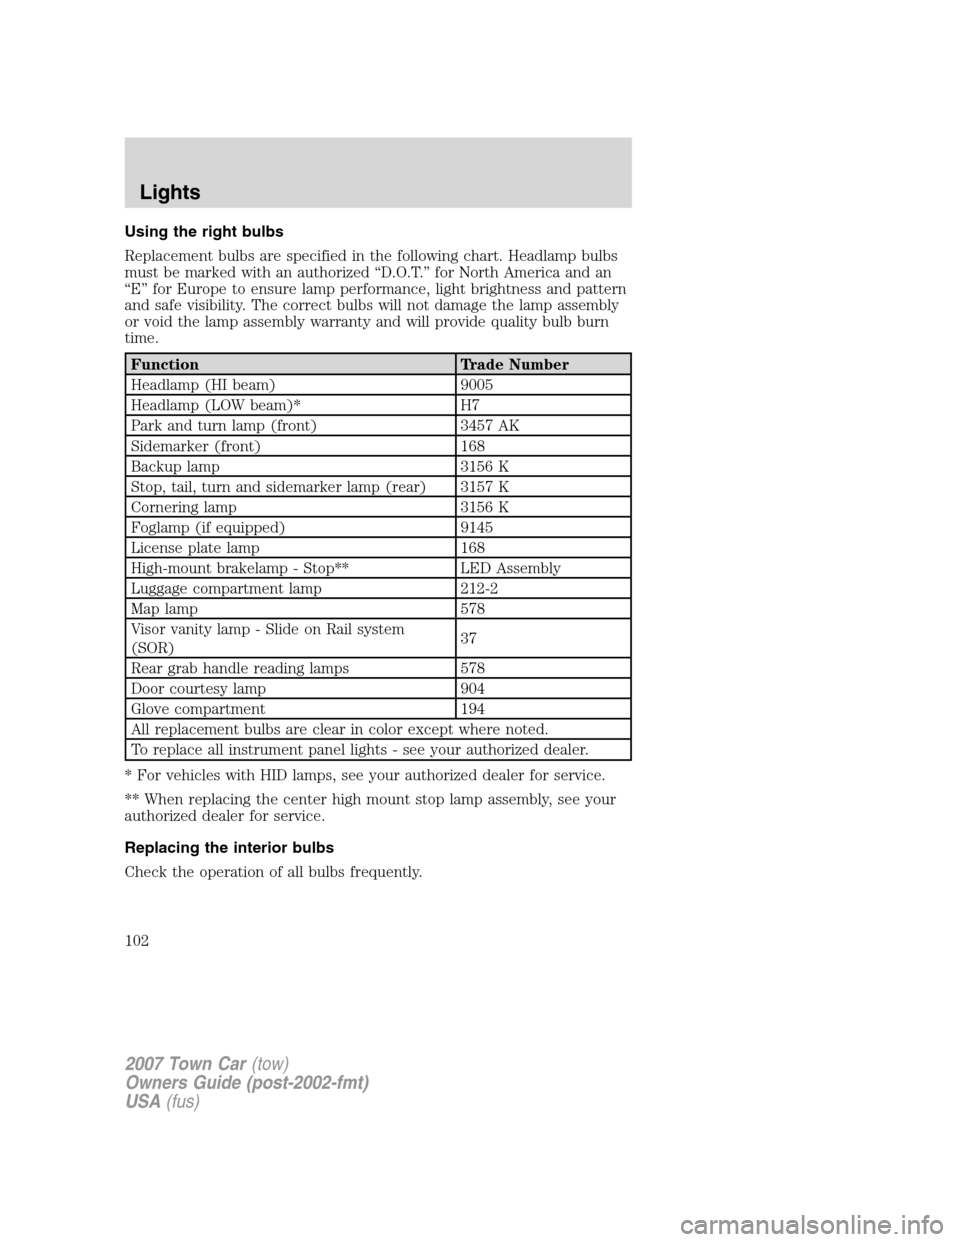 LINCOLN TOWN CAR 2007  Owners Manual Using the right bulbs
Replacement bulbs are specified in the following chart. Headlamp bulbs
must be marked with an authorized “D.O.T.” for North America and an
“E” for Europe to ensure lamp p